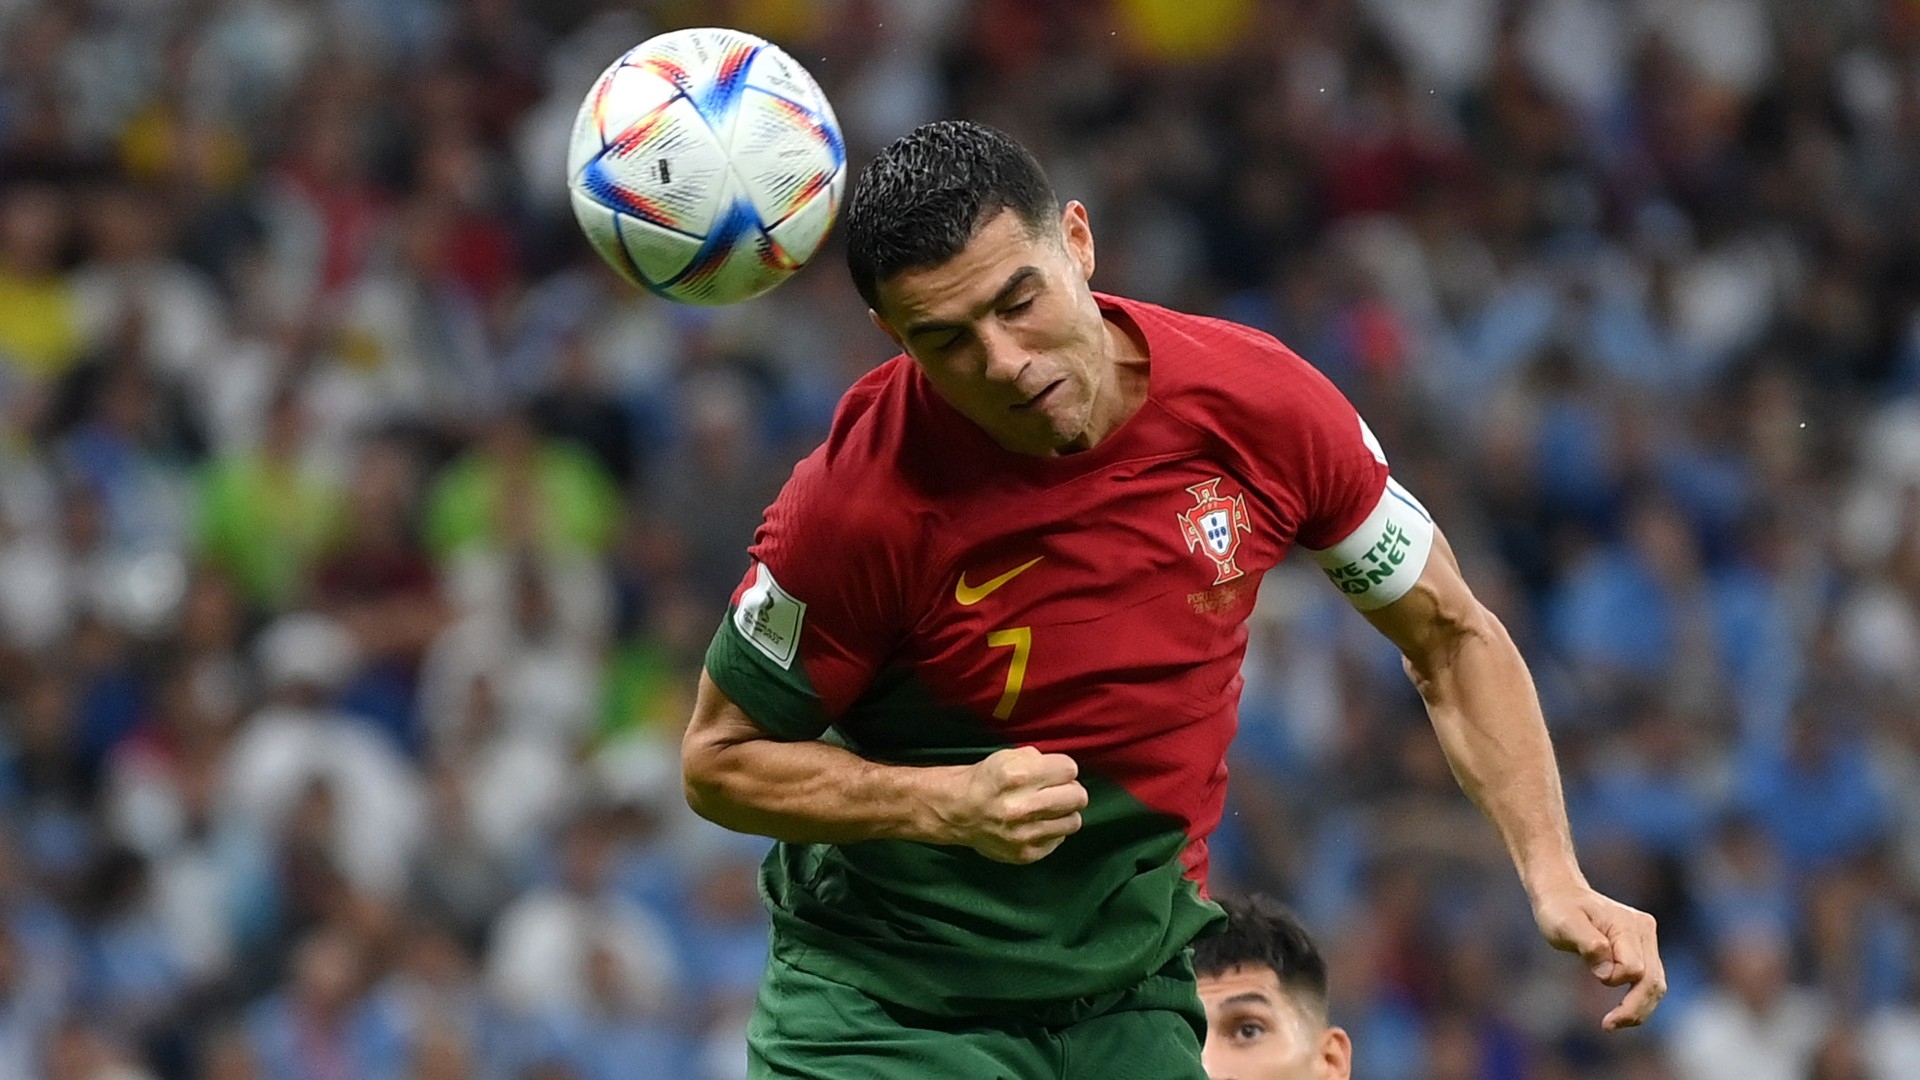 Adidas technology confirms Ronaldo did not make contact with the ball for Portugal goal 